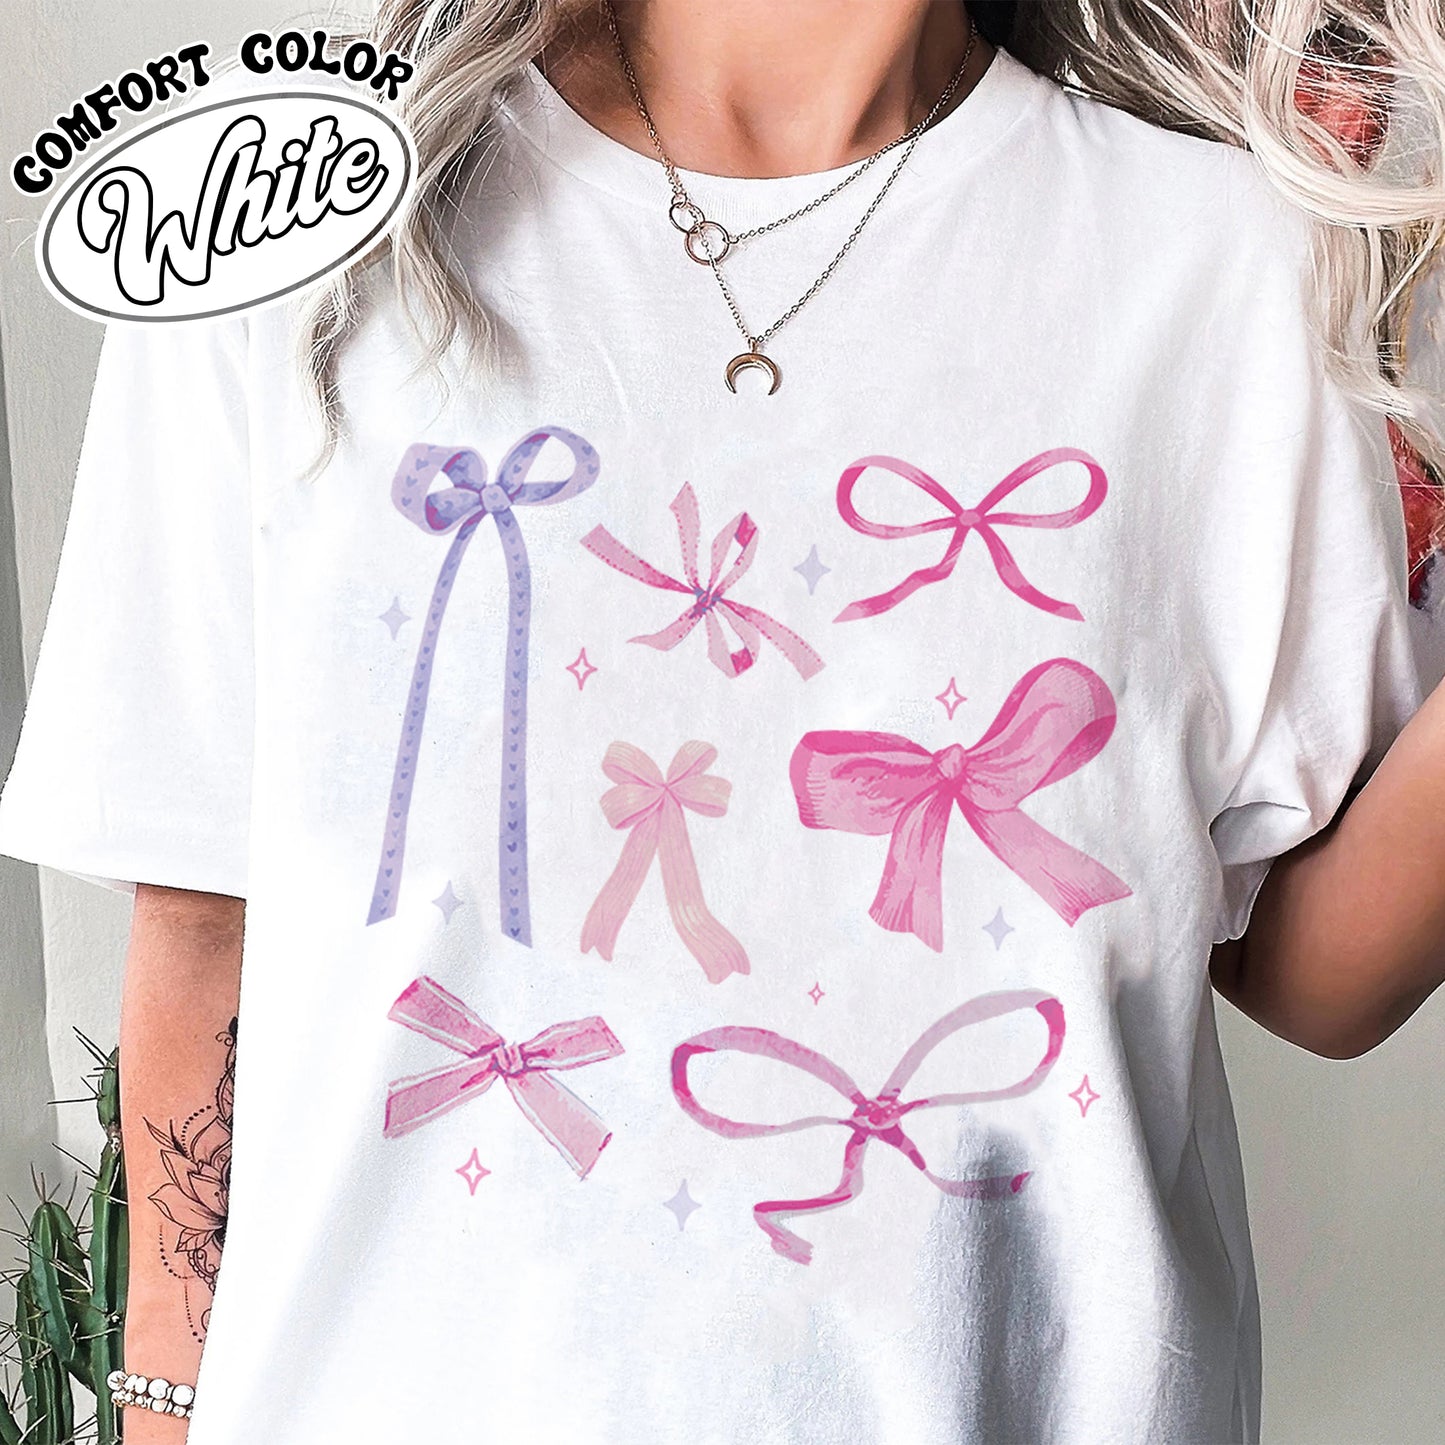 Coquette Pink Bow Comfort Color Shirt, Trendy Pink Bow Clothing, Pink Bow, Pink Bow, Coquette Shirt, Aesthetic Pink Bow